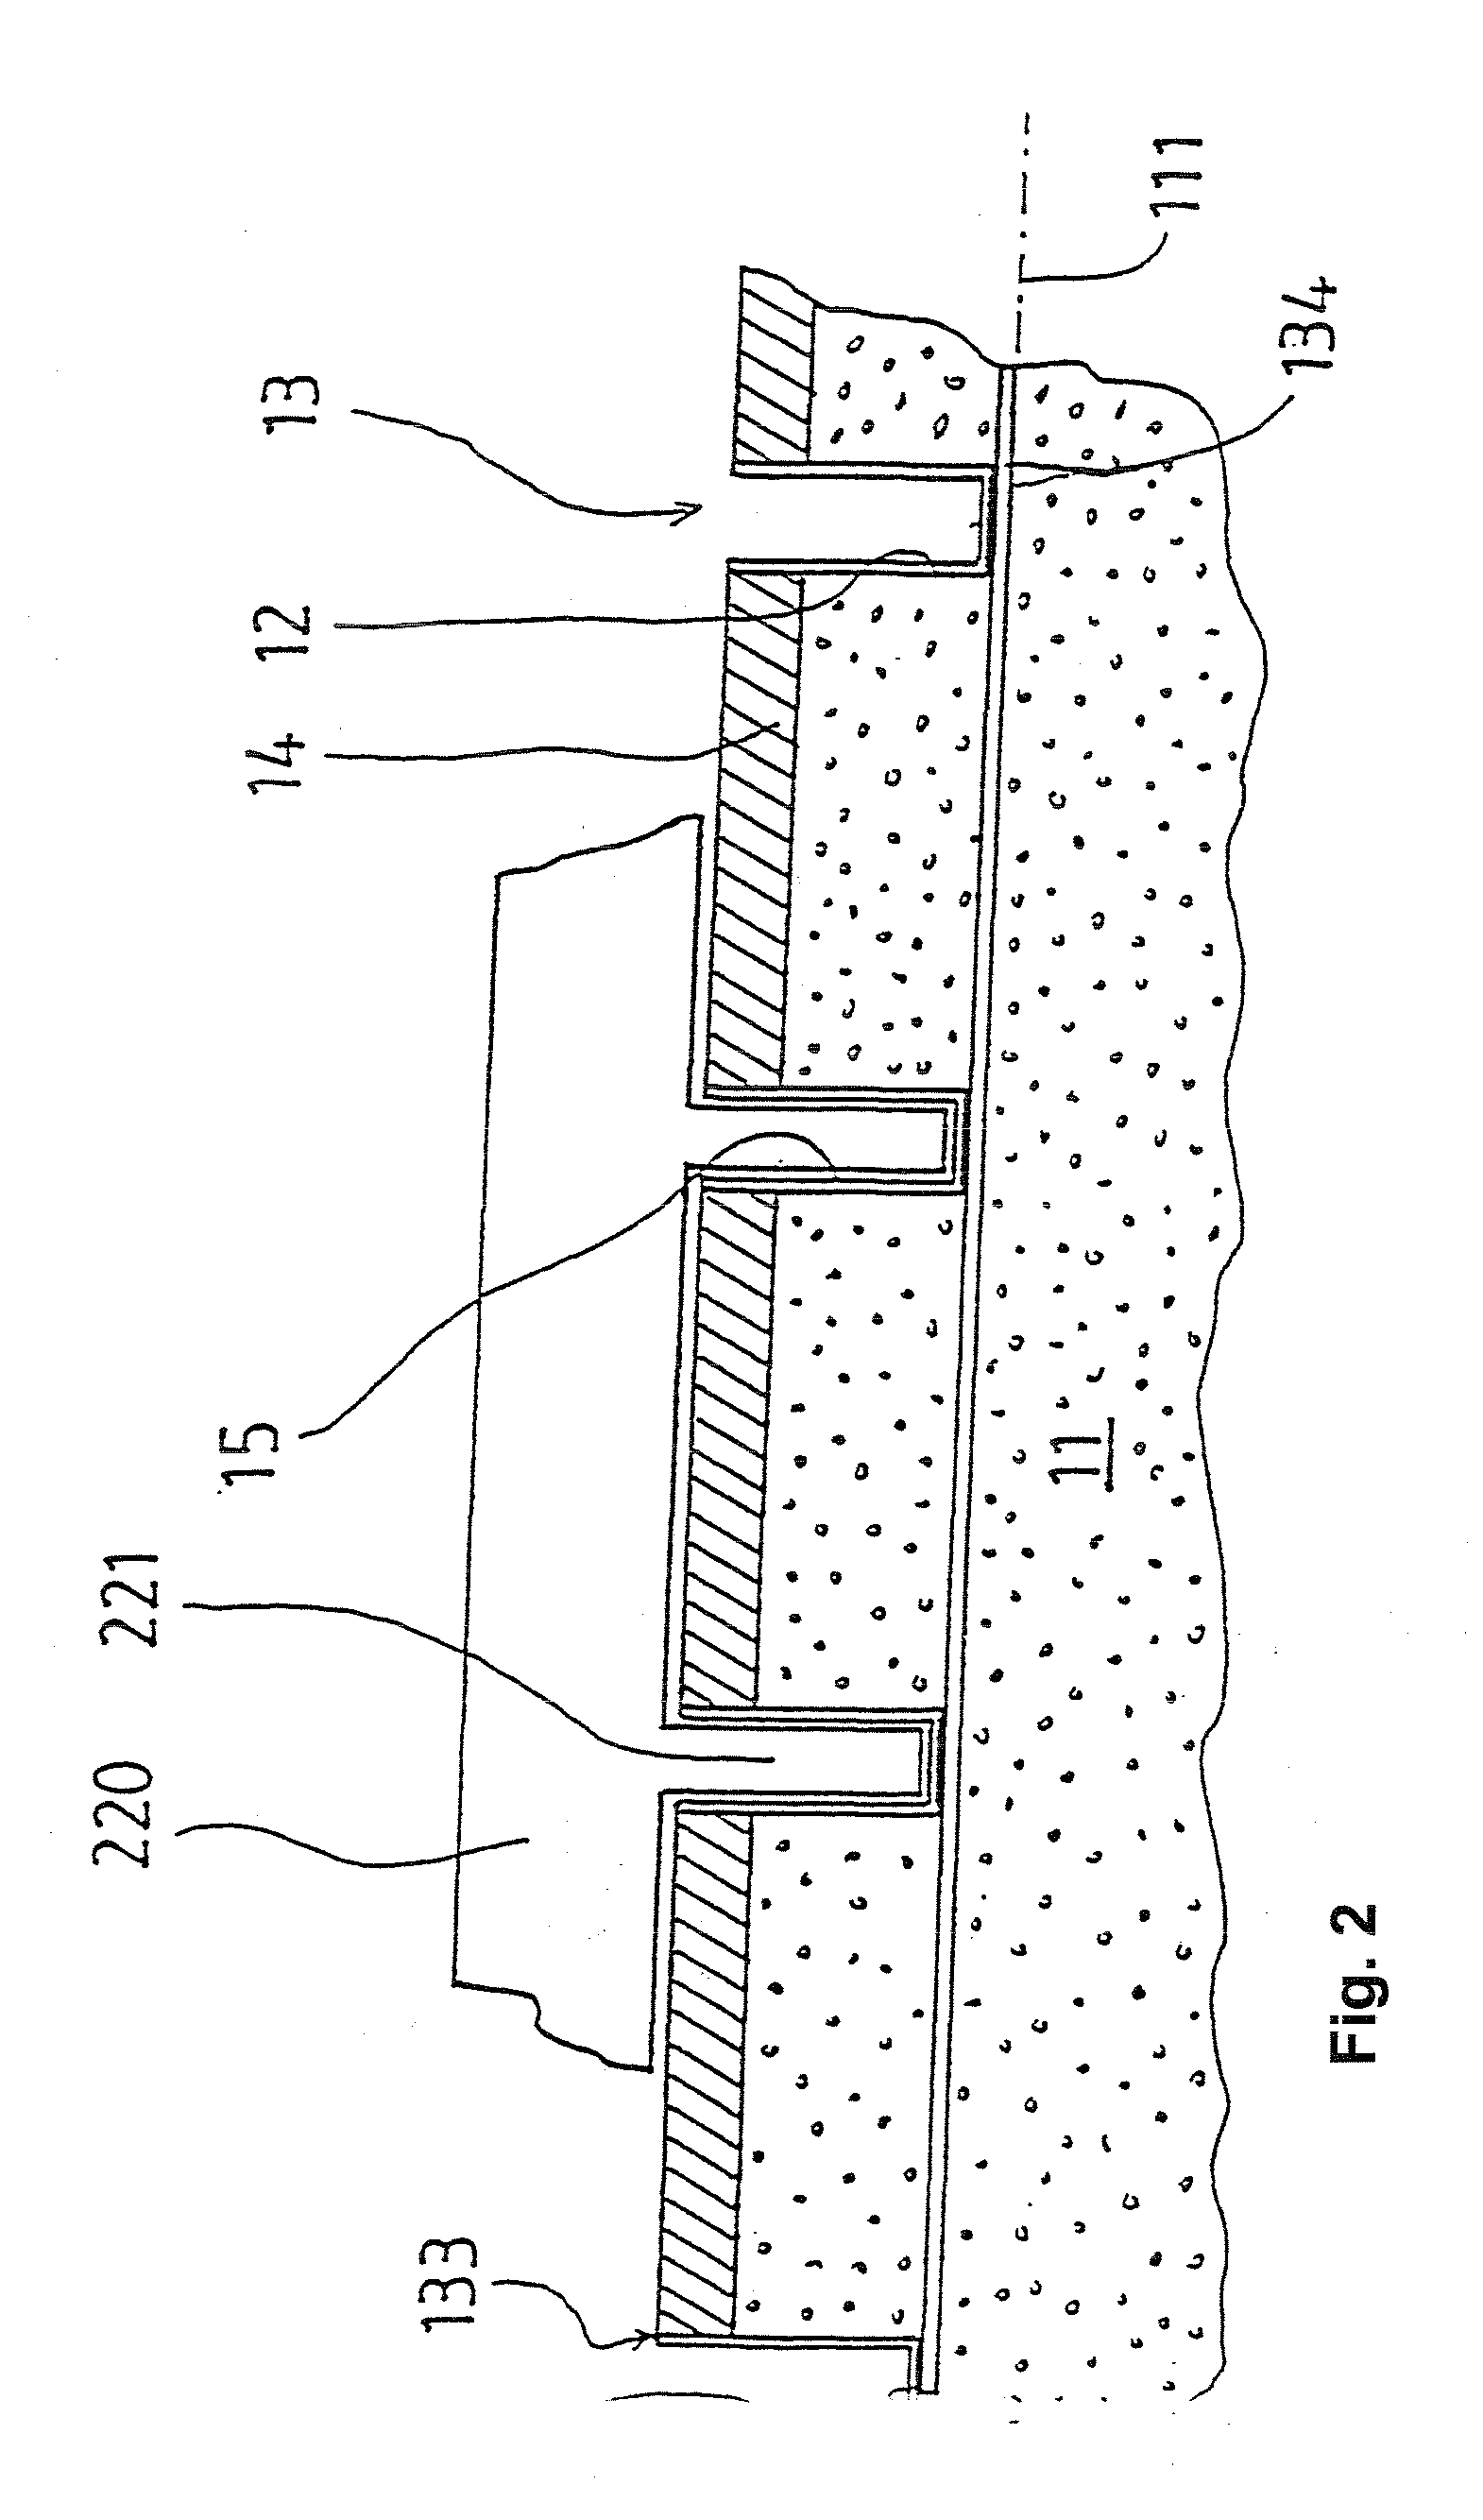 System for a free stall barn with a grooved floor, corresponding precast concrete slab and animal keeping method